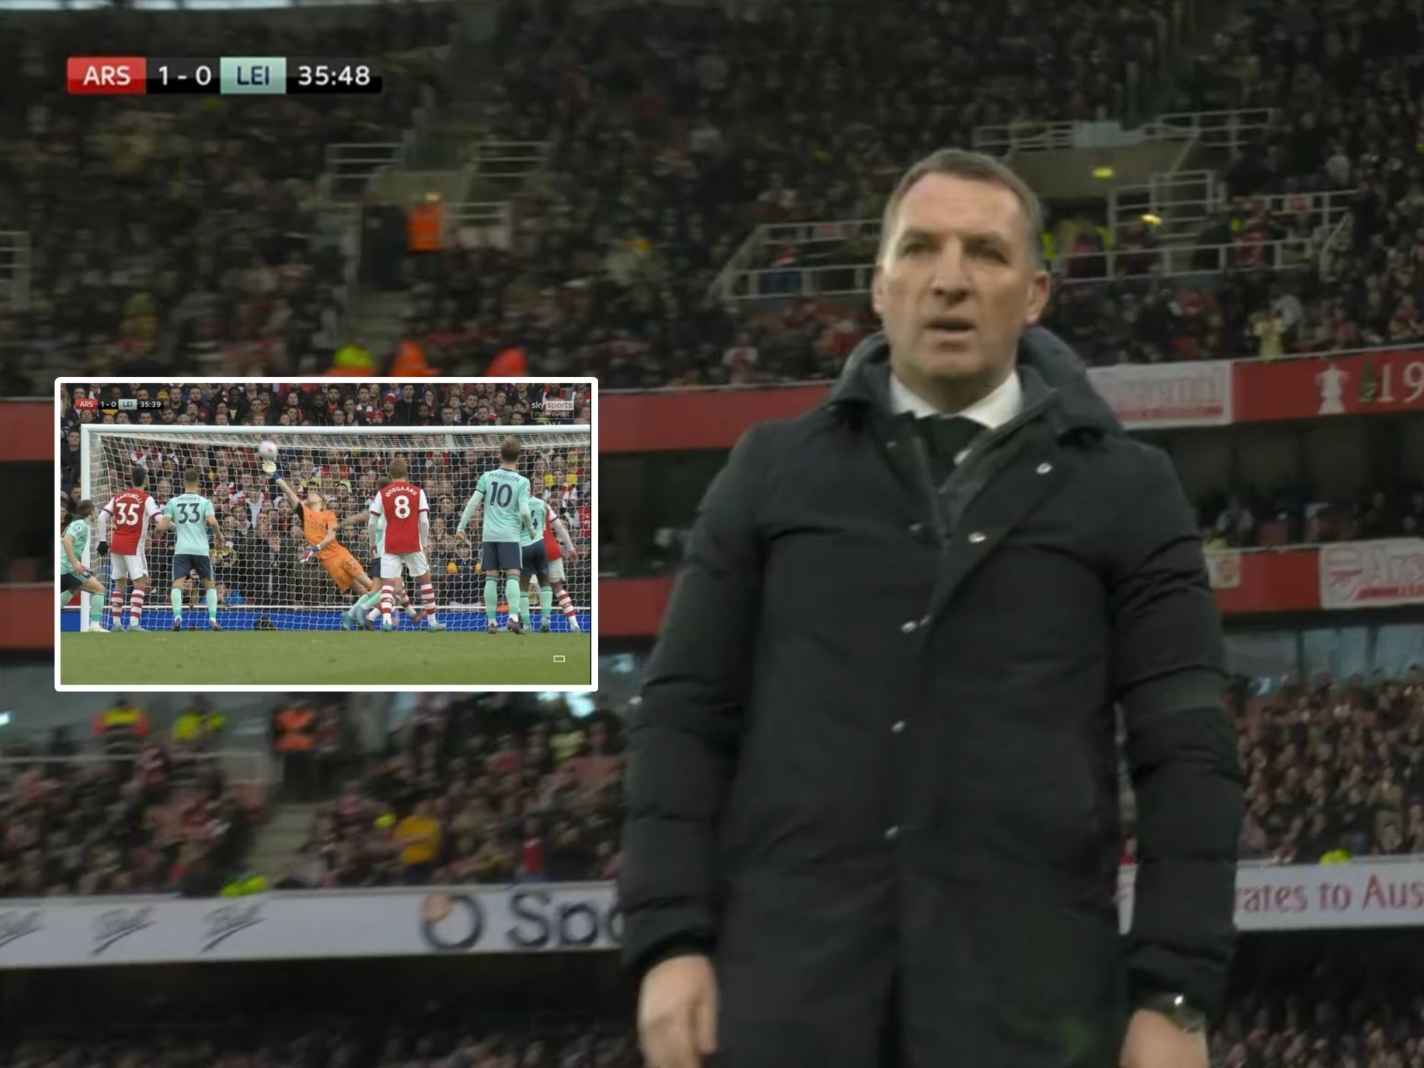 Brendan Rodgers reaction to Ramsdale's phenomenal save